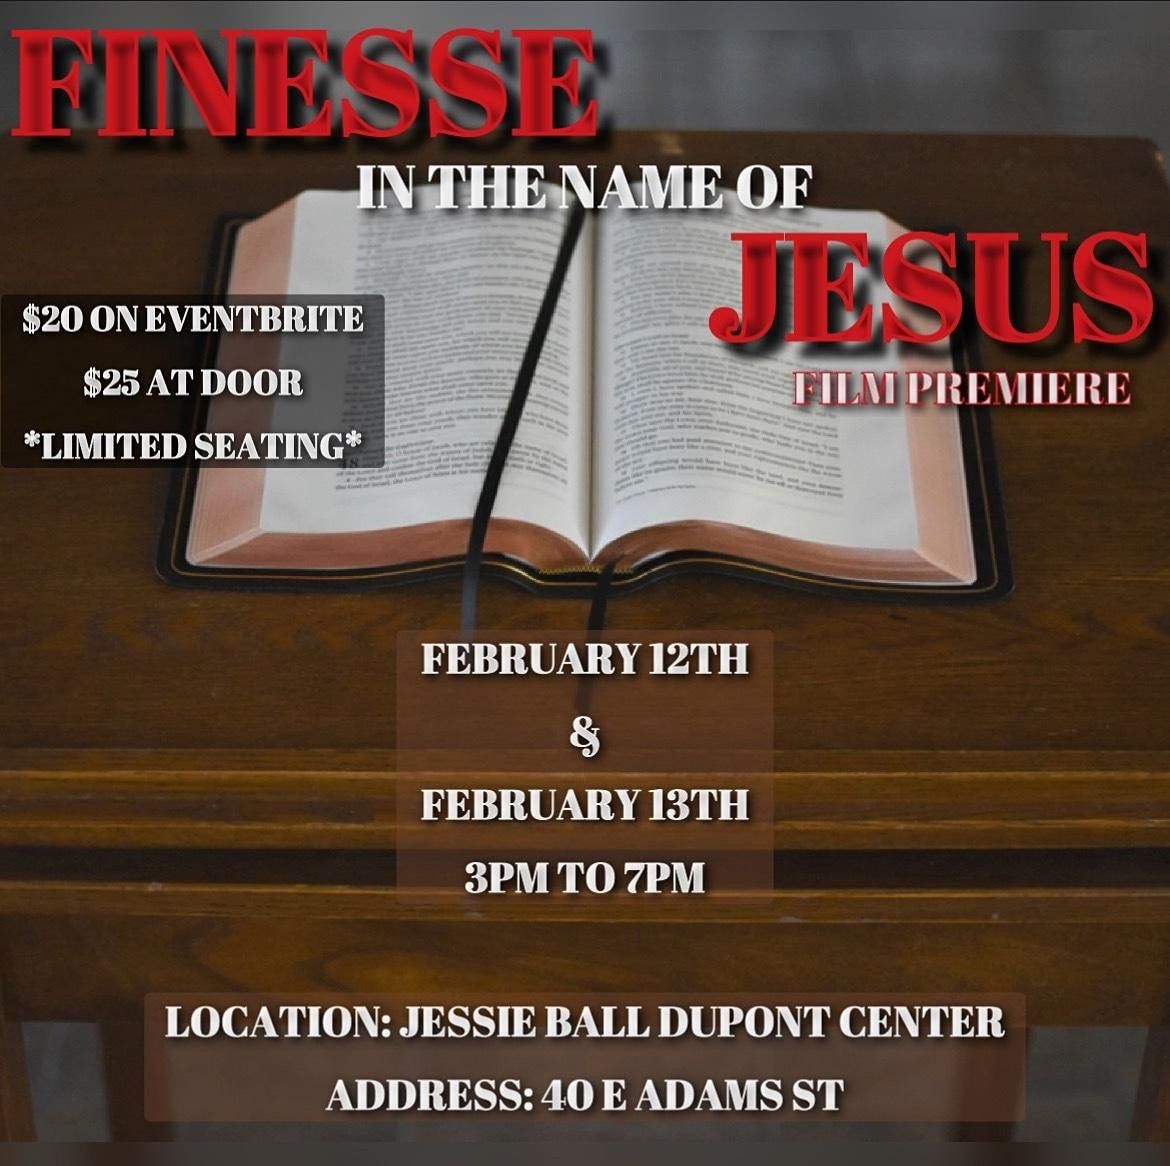 FILM PREMEIRE "Finesse in the Name of Jesus"